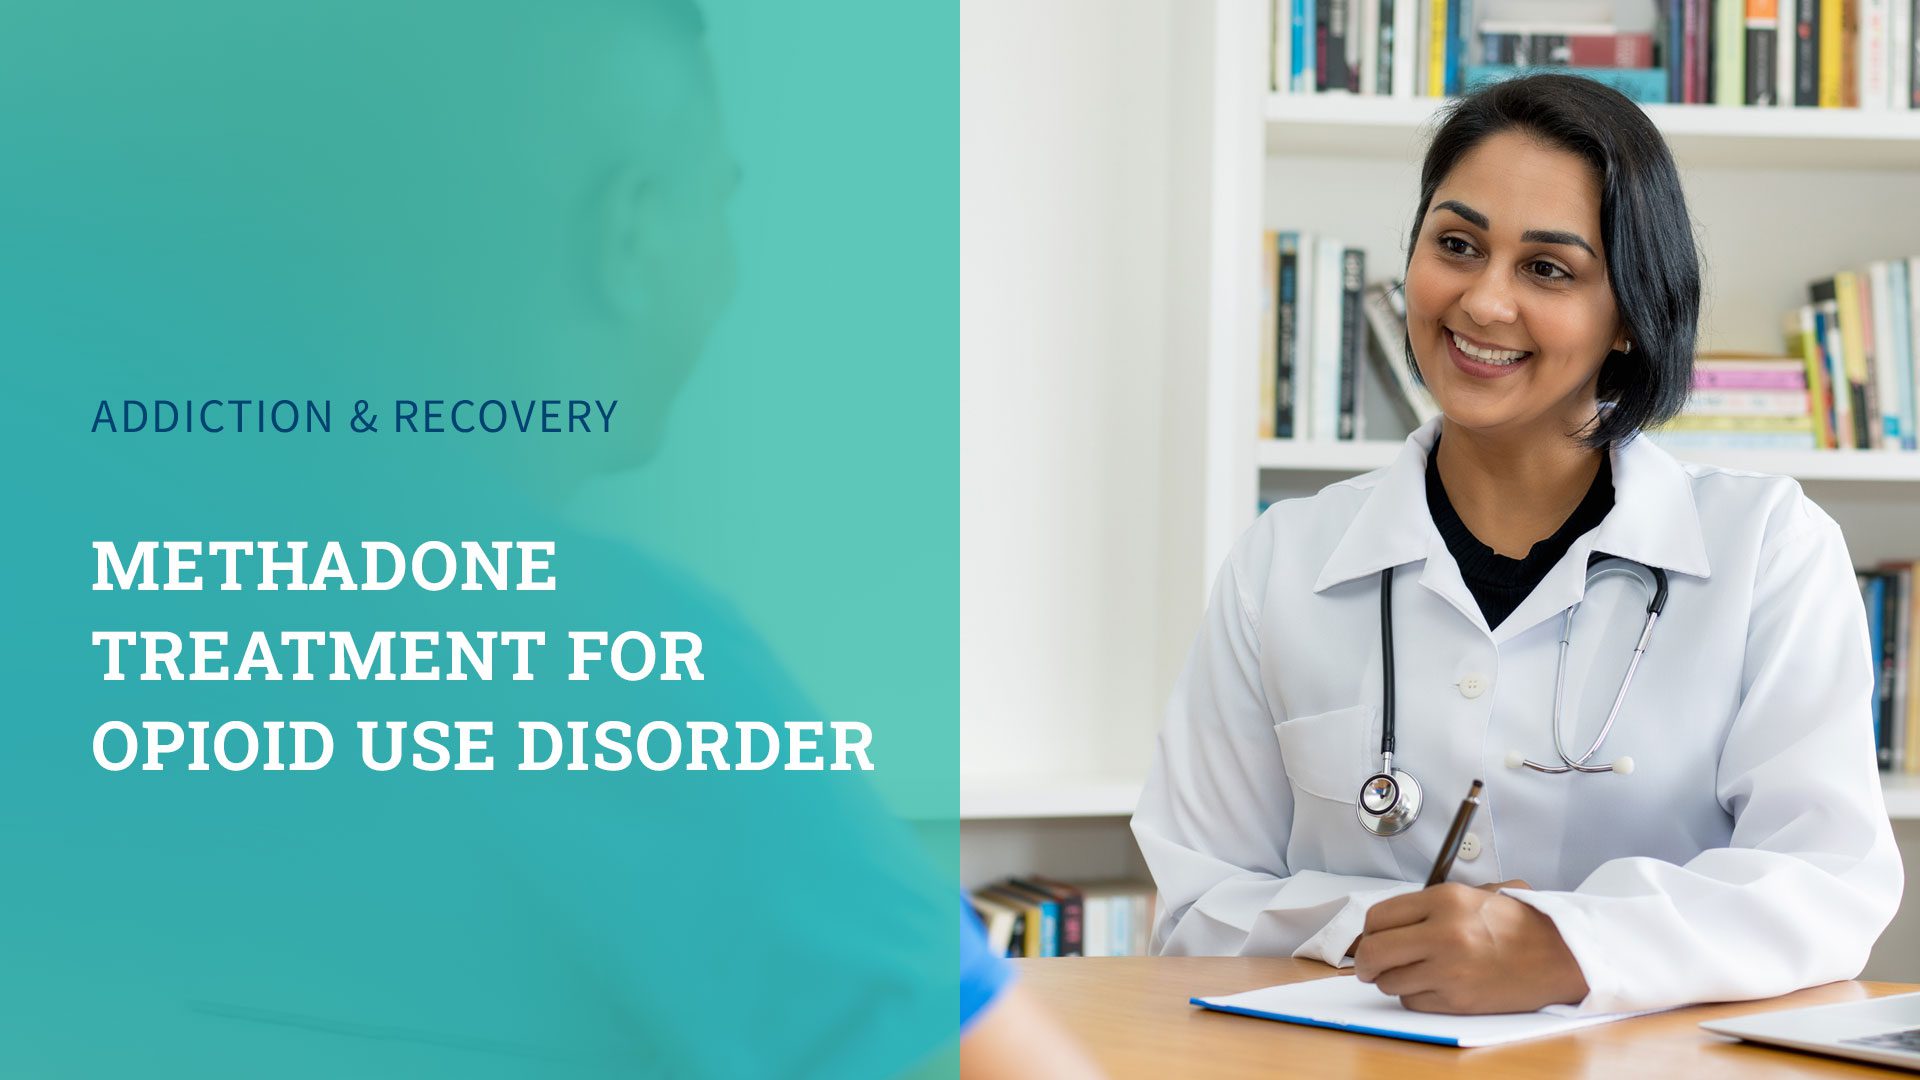 Medication-Assisted Treatment: Methadone Treatment for Opioid Use Disorder (OUD)